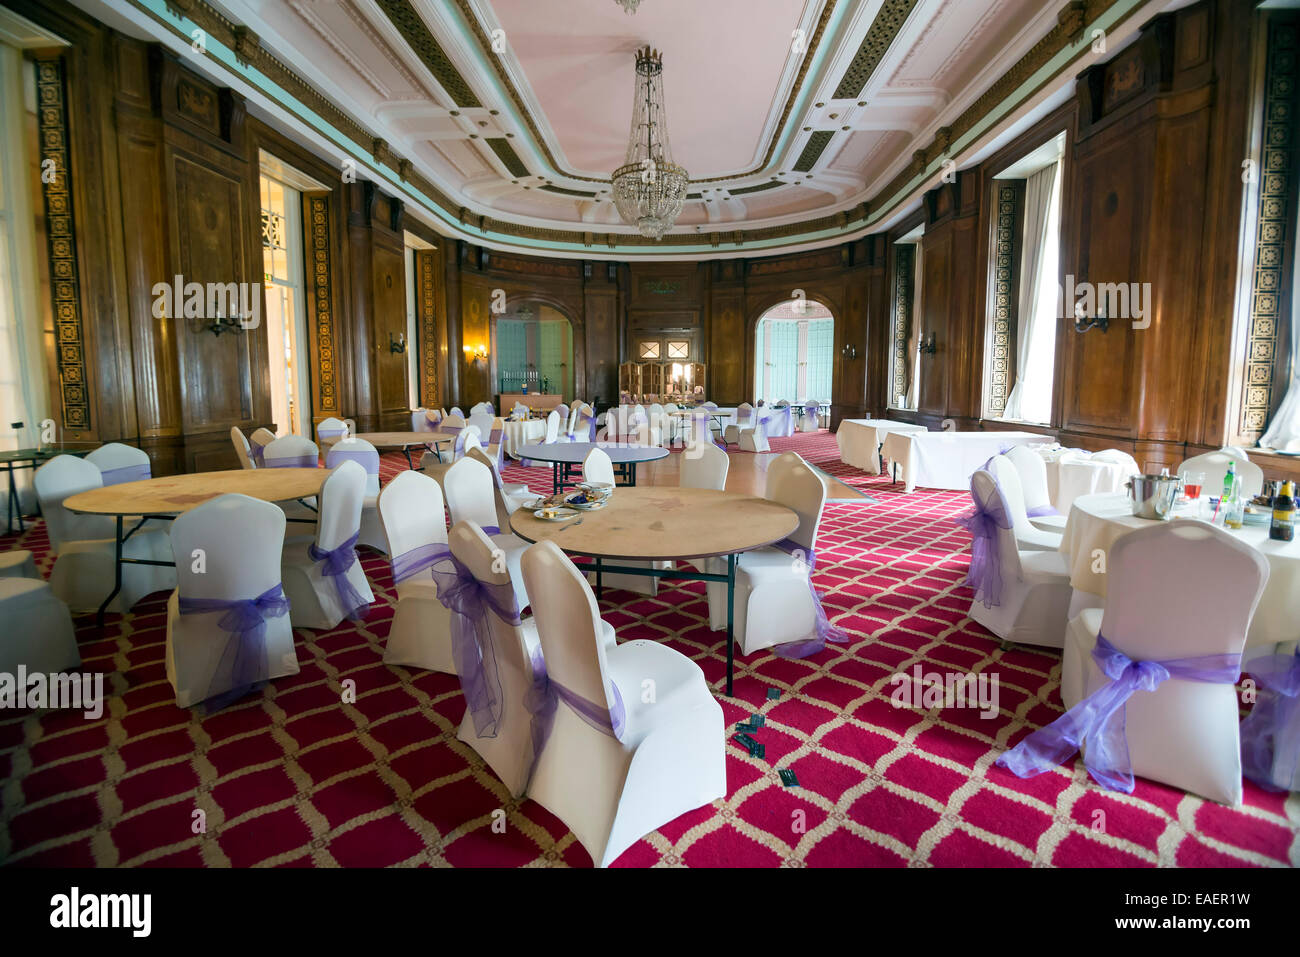 LIVERPOOL, UNITED KINGDOM - JUNE 8, 2014: Halls of the Britannia Adelphi Hotel is located at Ranelagh Place, Liverpool city cent Stock Photo